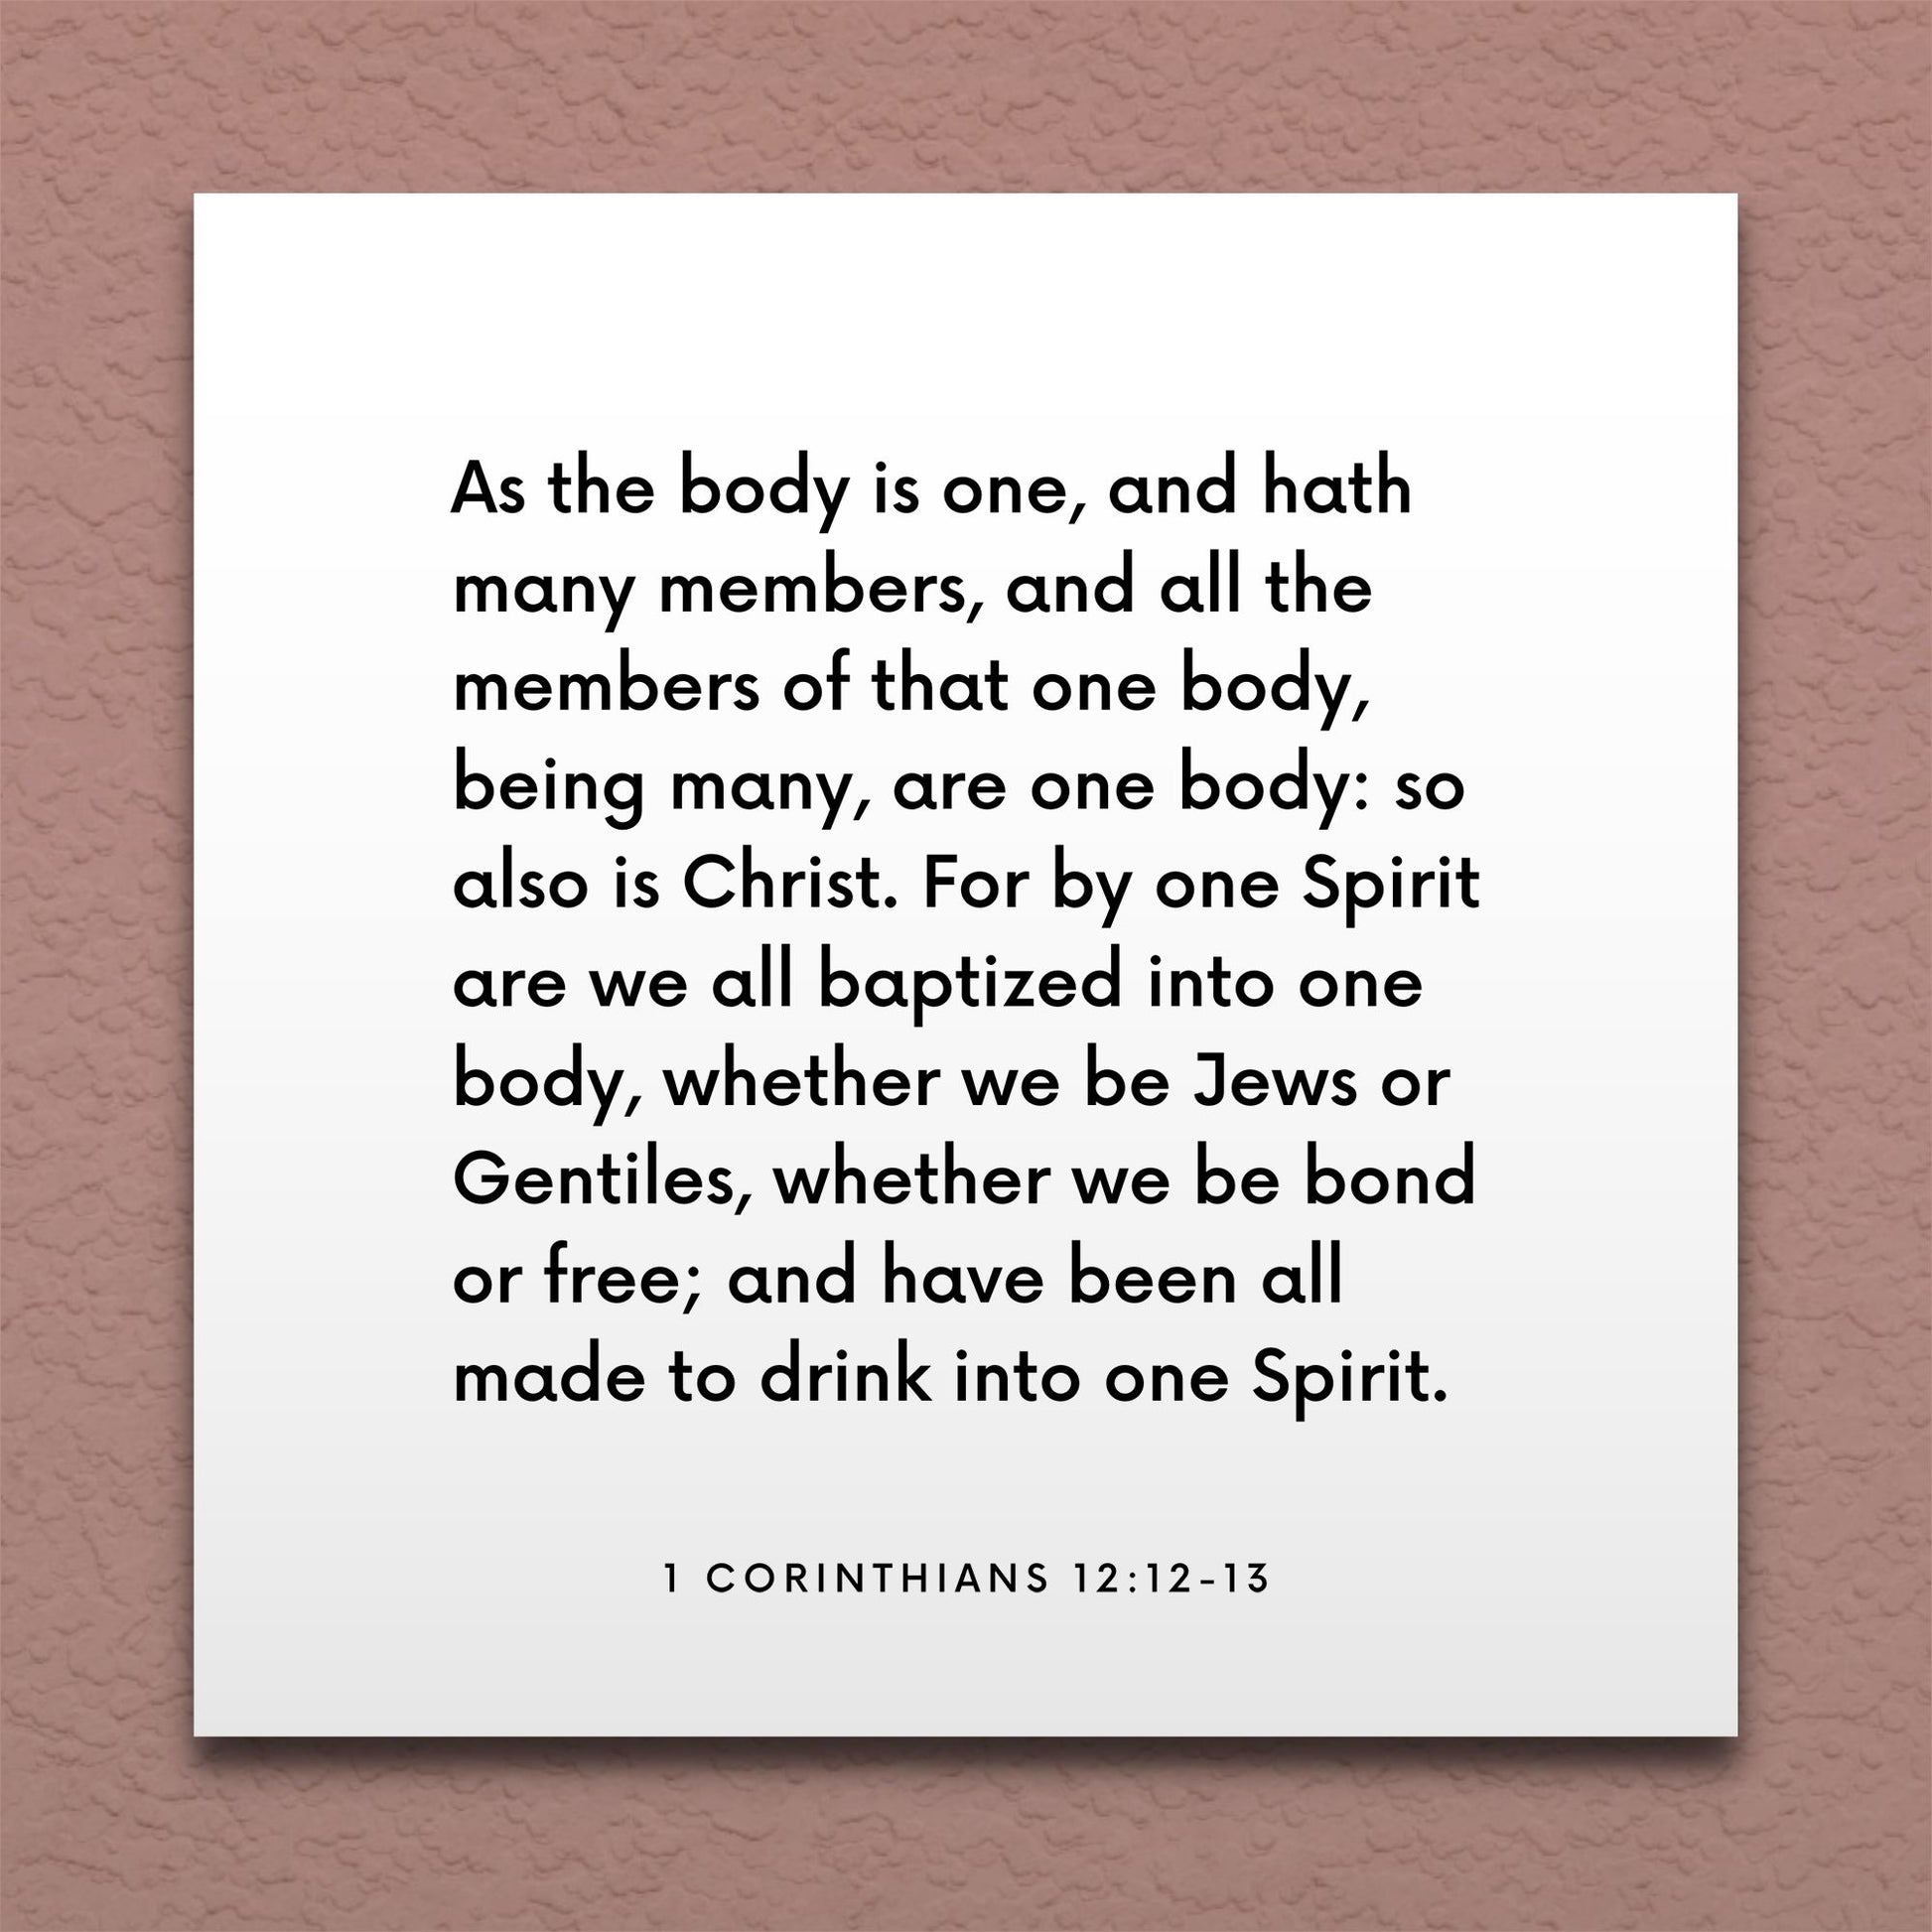 Wall-mounted scripture tile for 1 Corinthians 12:12-13 - "By one Spirit are we all baptized into one body"